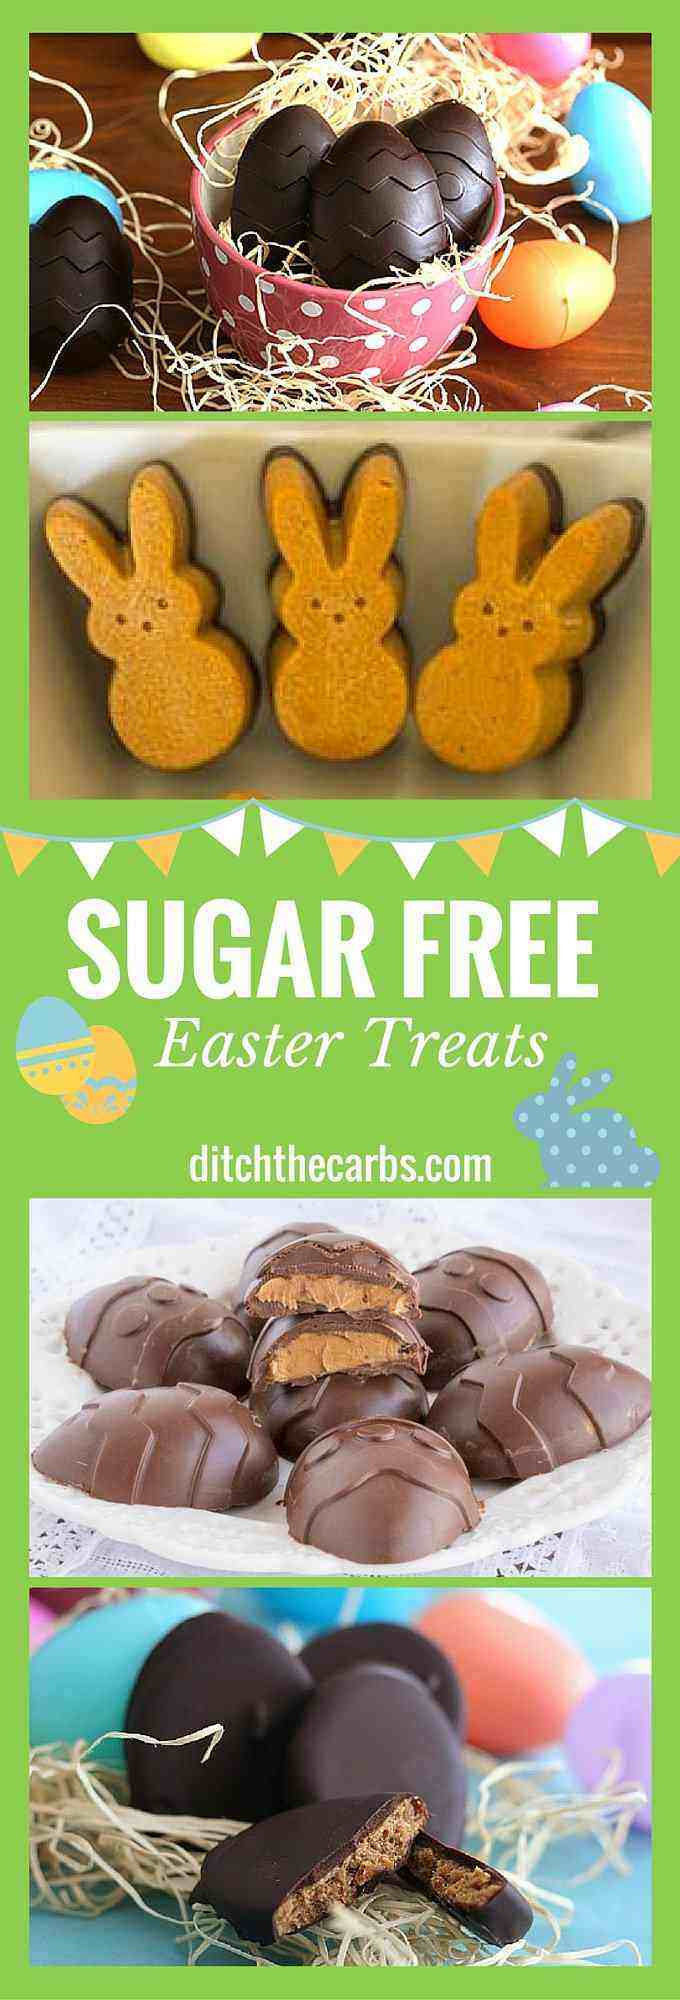 Diabetic Easter Recipes
 Sugar Free Easter Treats Ditch The Carbs